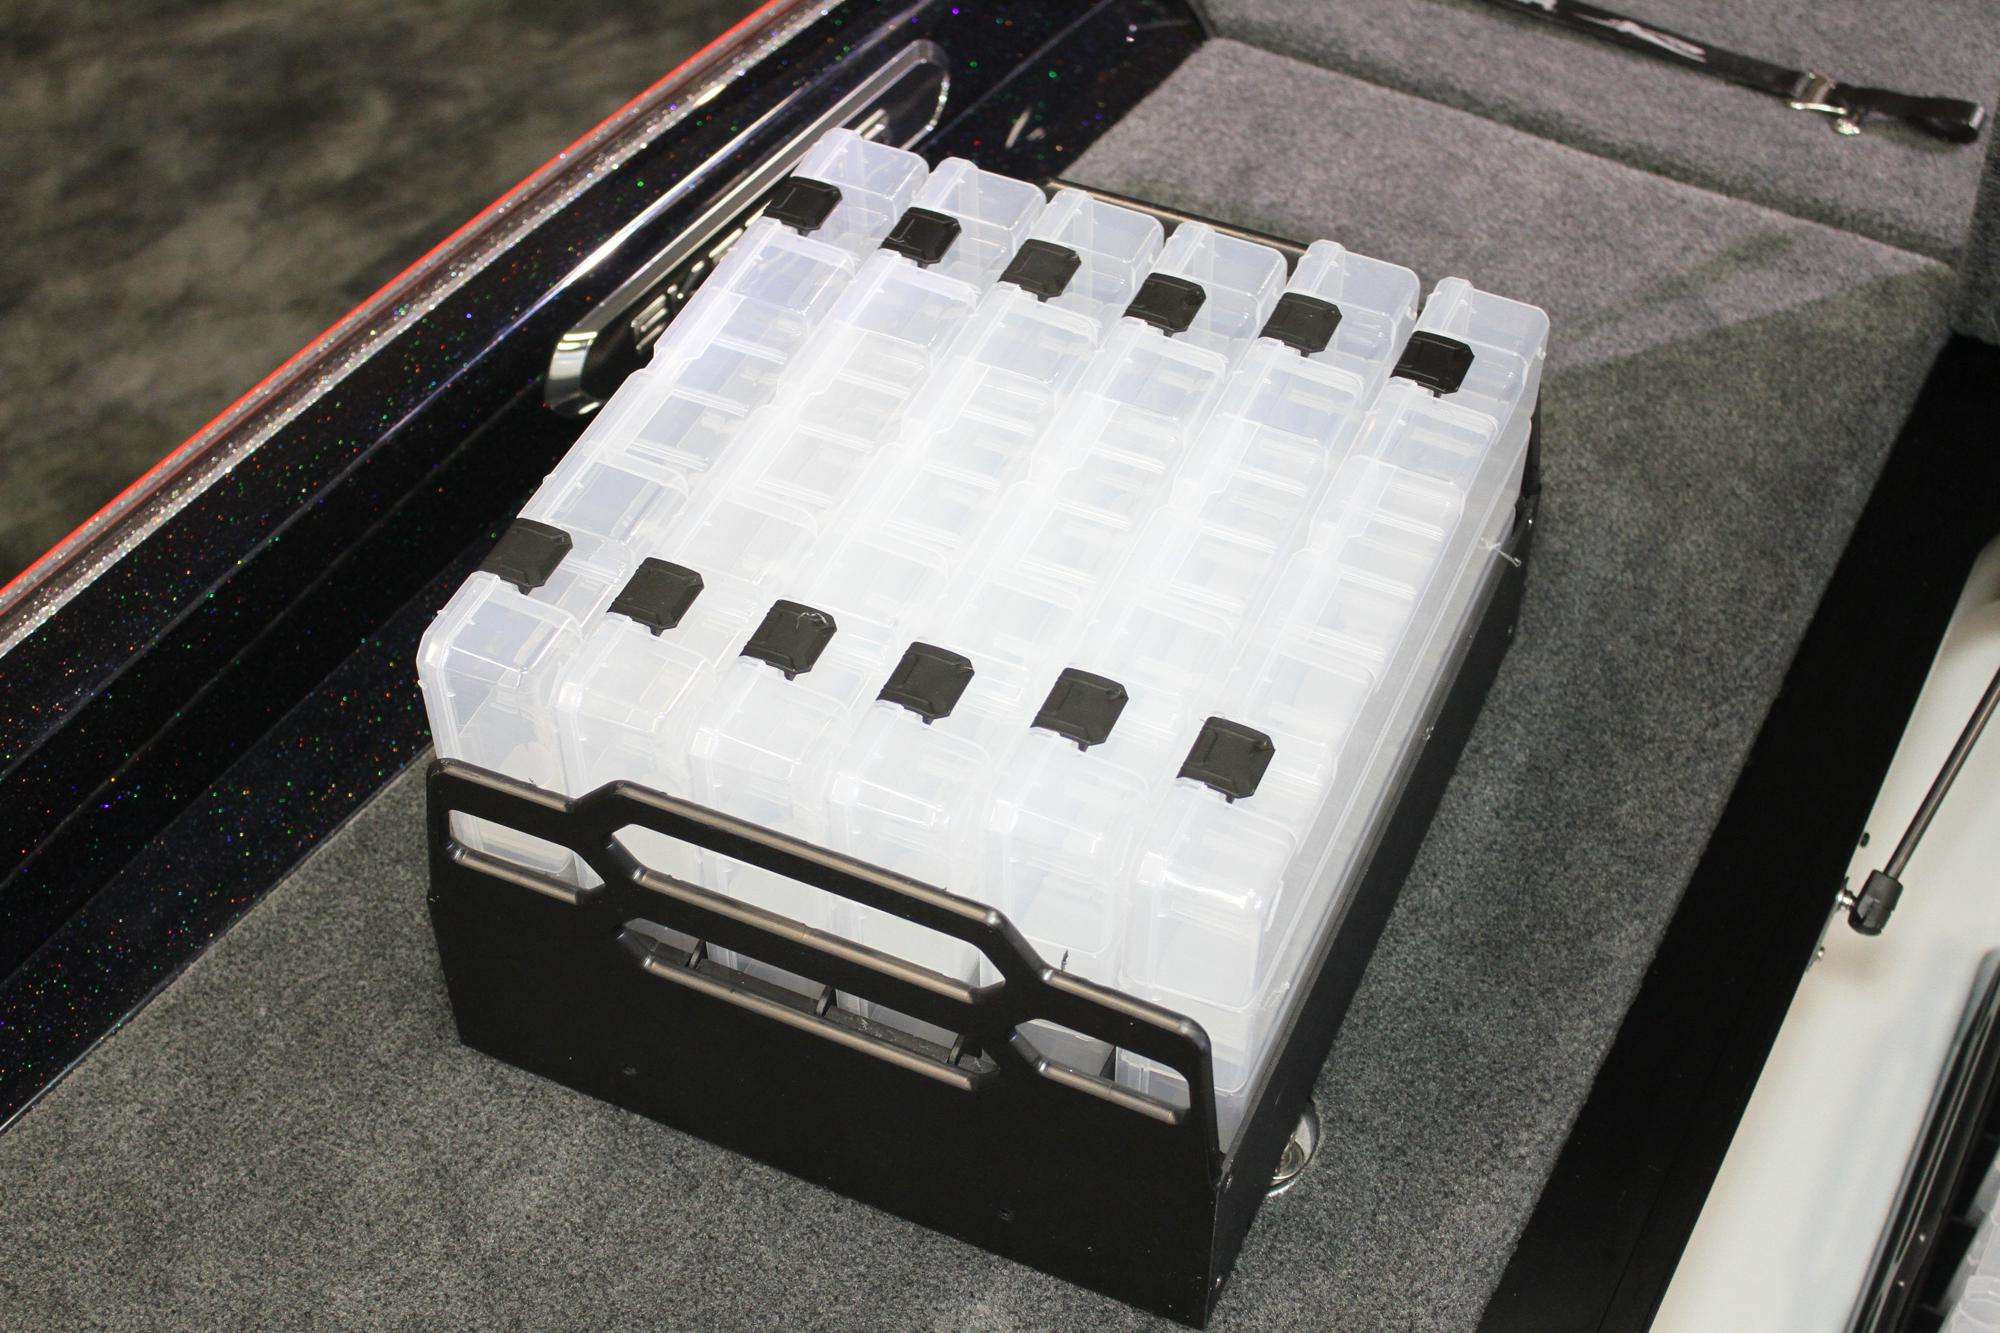 Removable, modular tackle trays that hold 3700 size boxes â these are included with the boat.